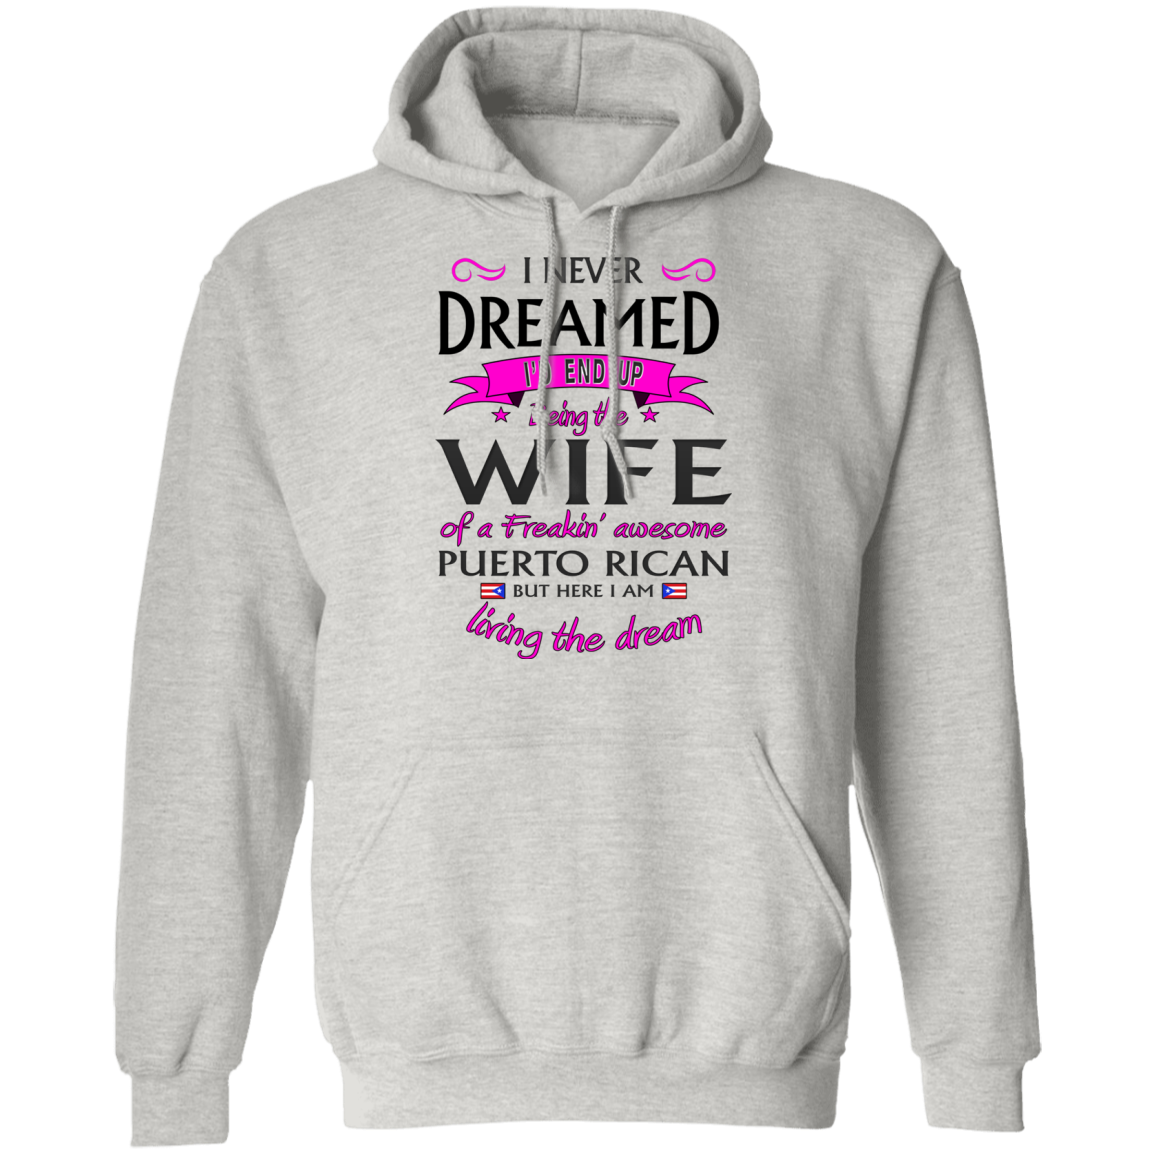 WIFE of Awesome PR Pullover Hoodie - Puerto Rican Pride